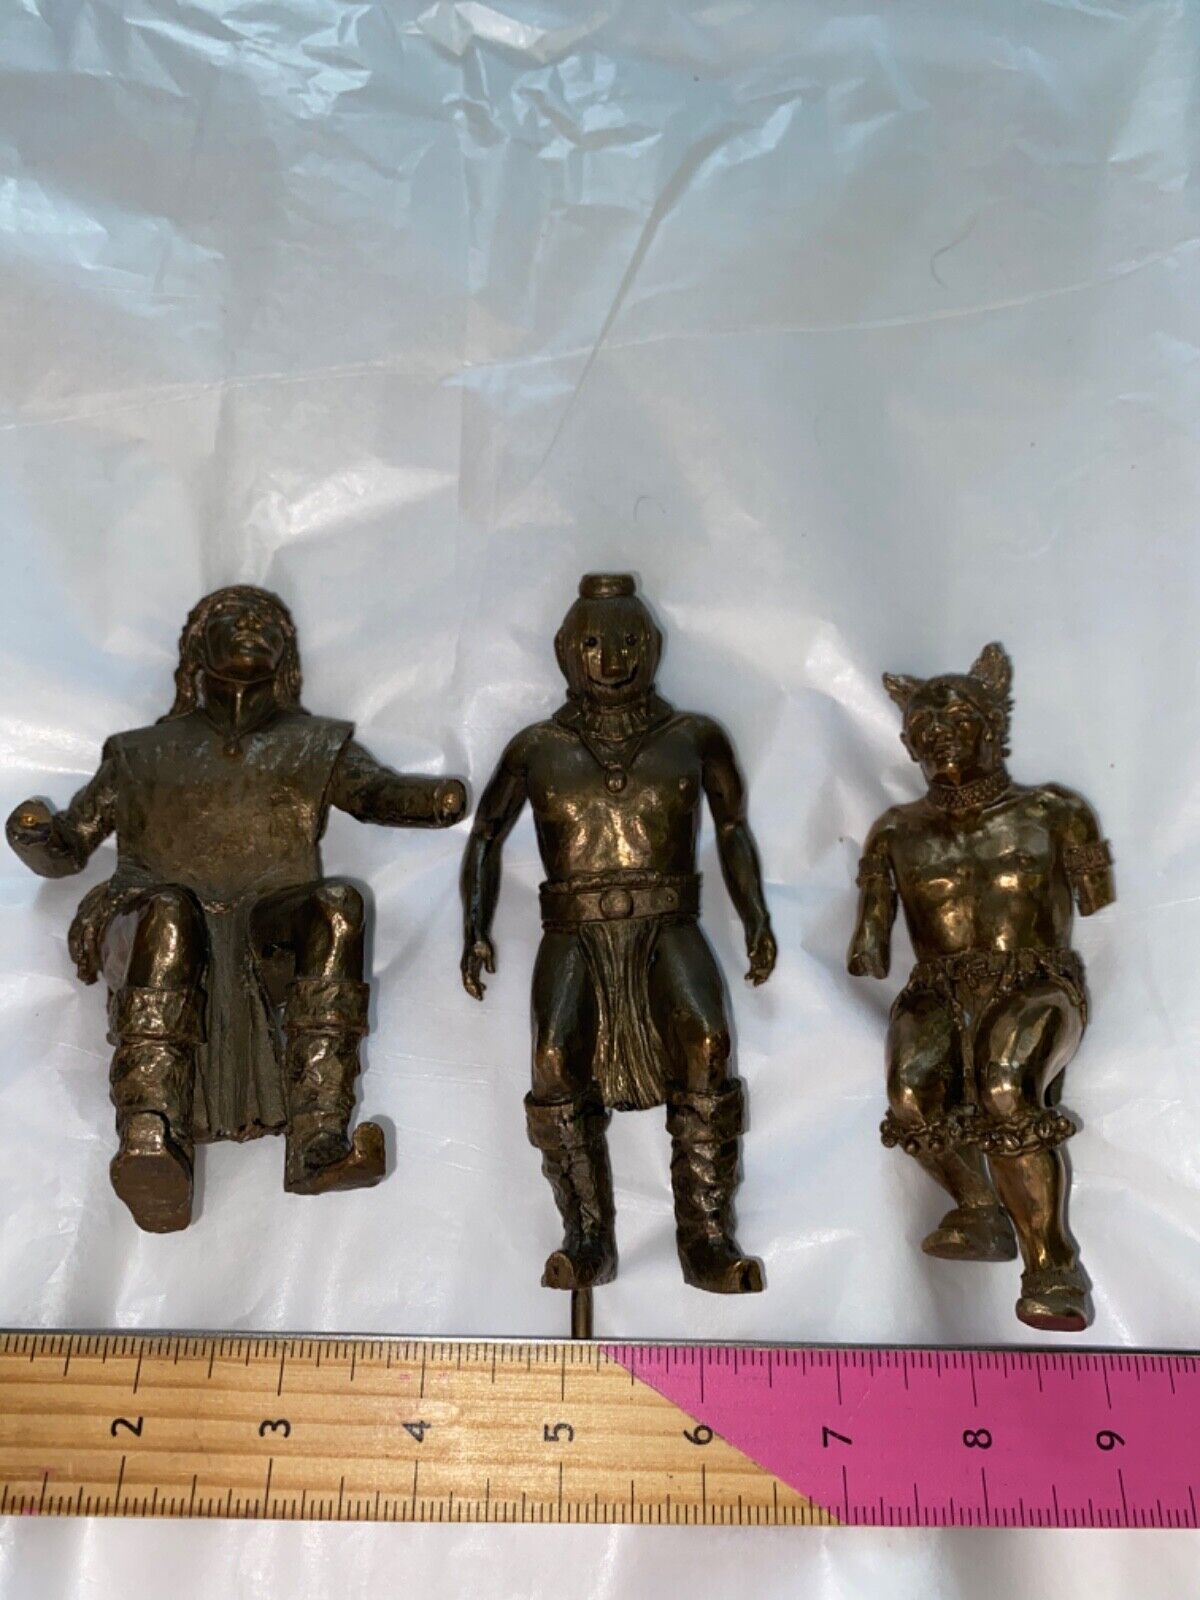 ANTIQUE HEAVY BRONZE NATIVE AMERICAN SCULPTURES IN VARIOUS DRESS/POSES